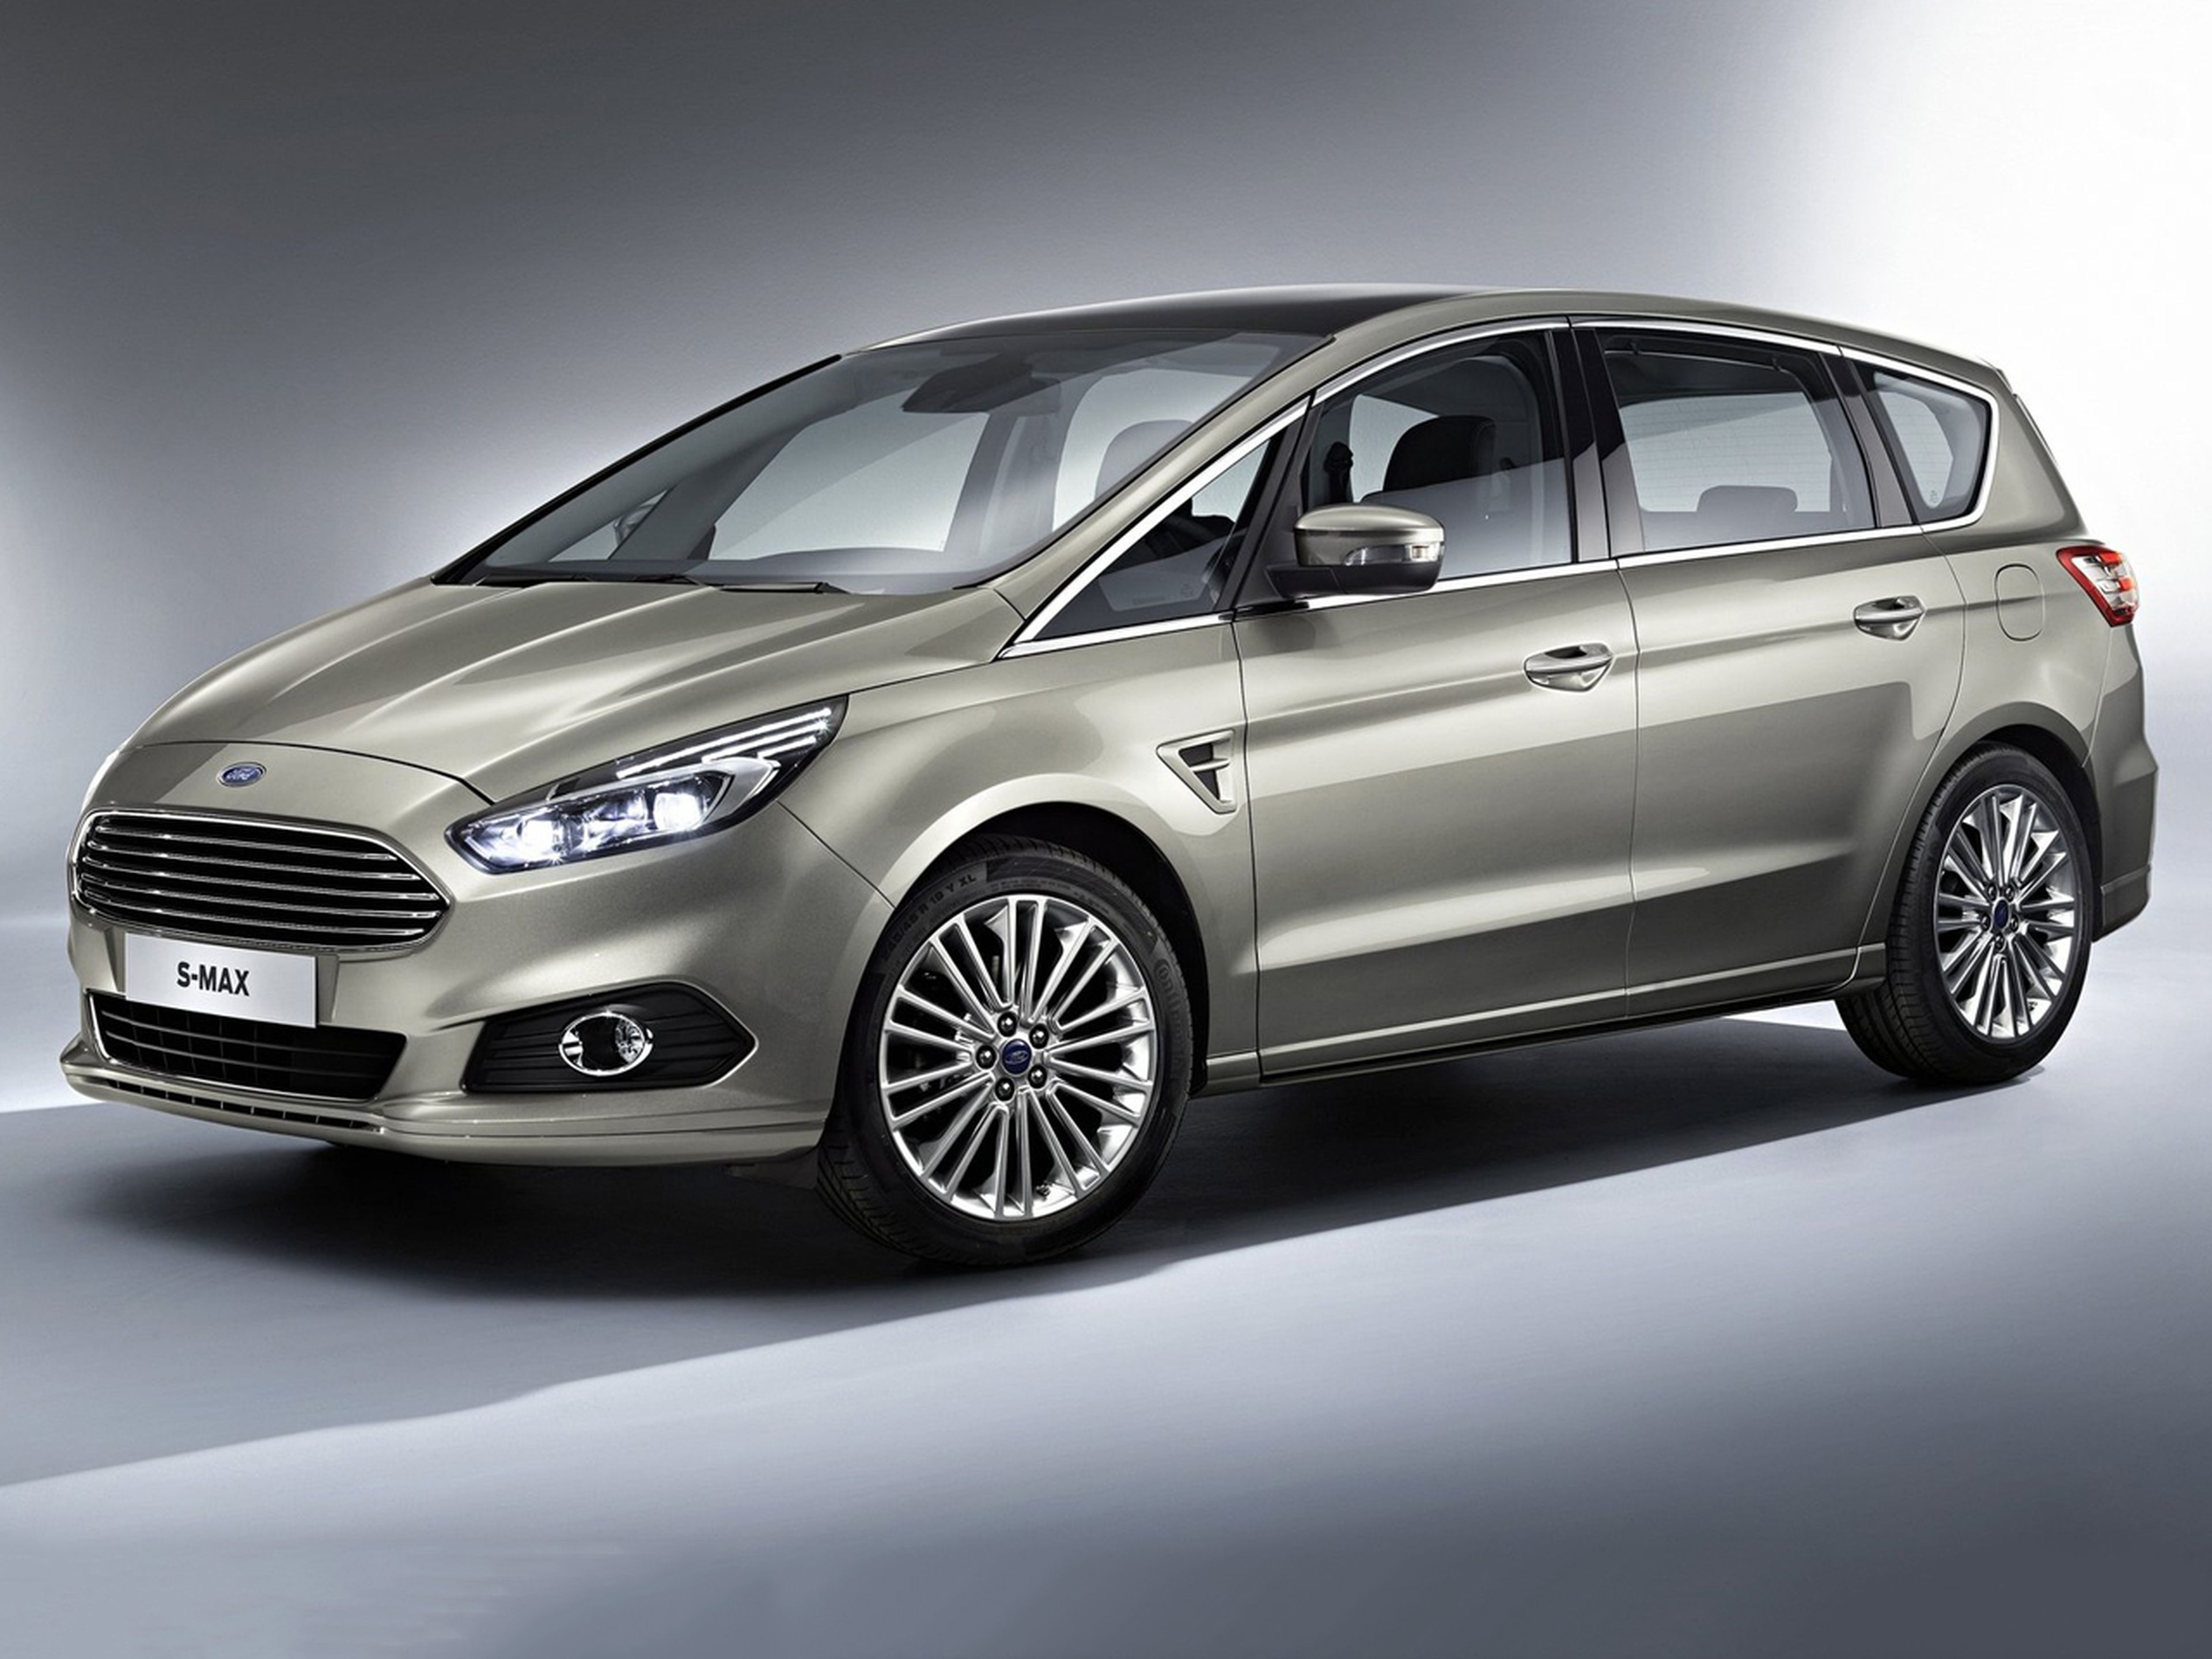 Ford-SMAX_2015_B01